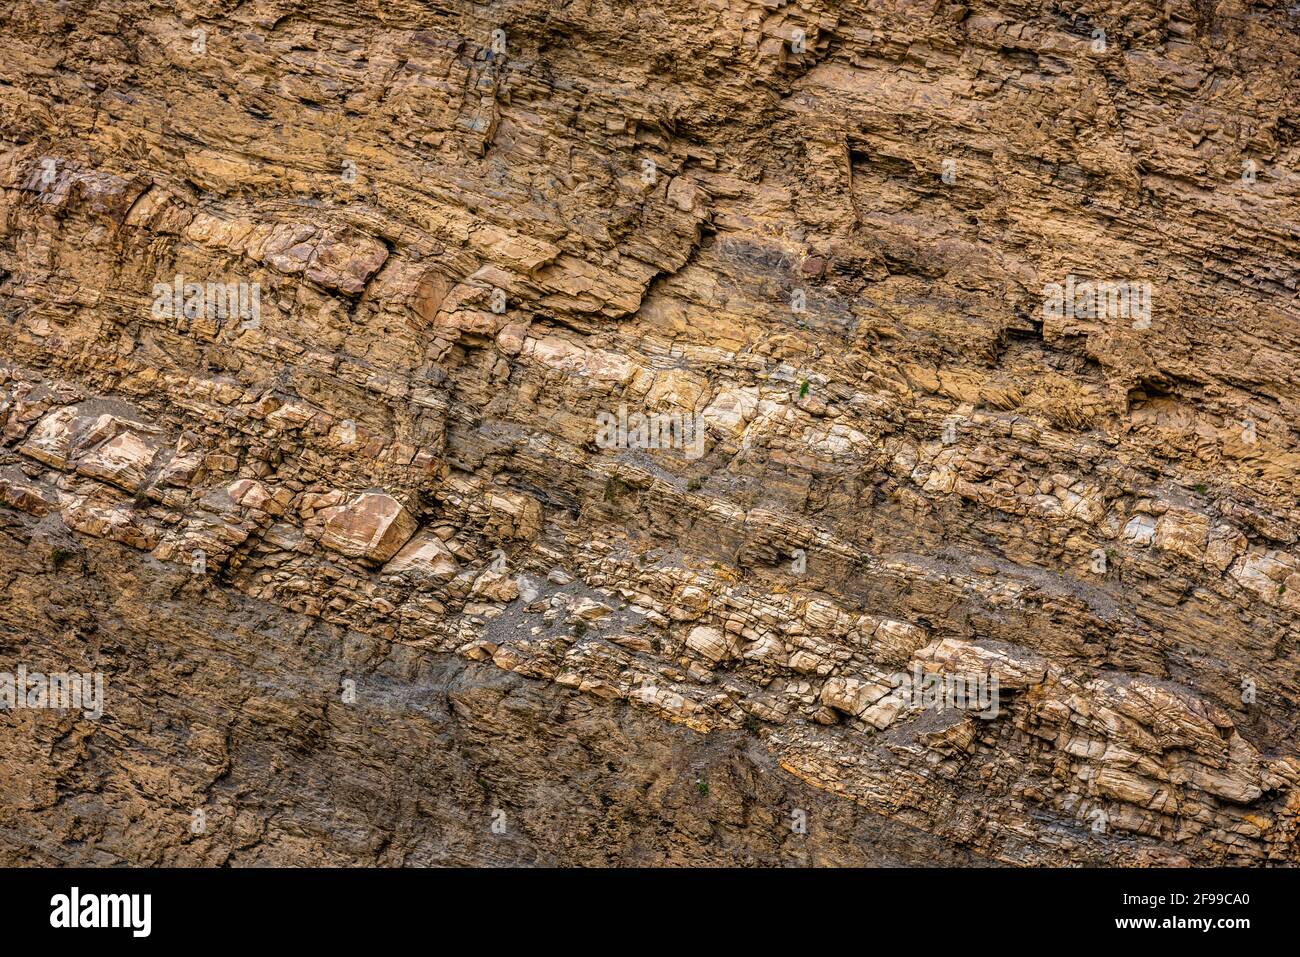 Rocks banding pattern of stratification in sedimentary rocks due to changes in texture or composition during deposition at Himalayas of Spiti . Sedime Stock Photo